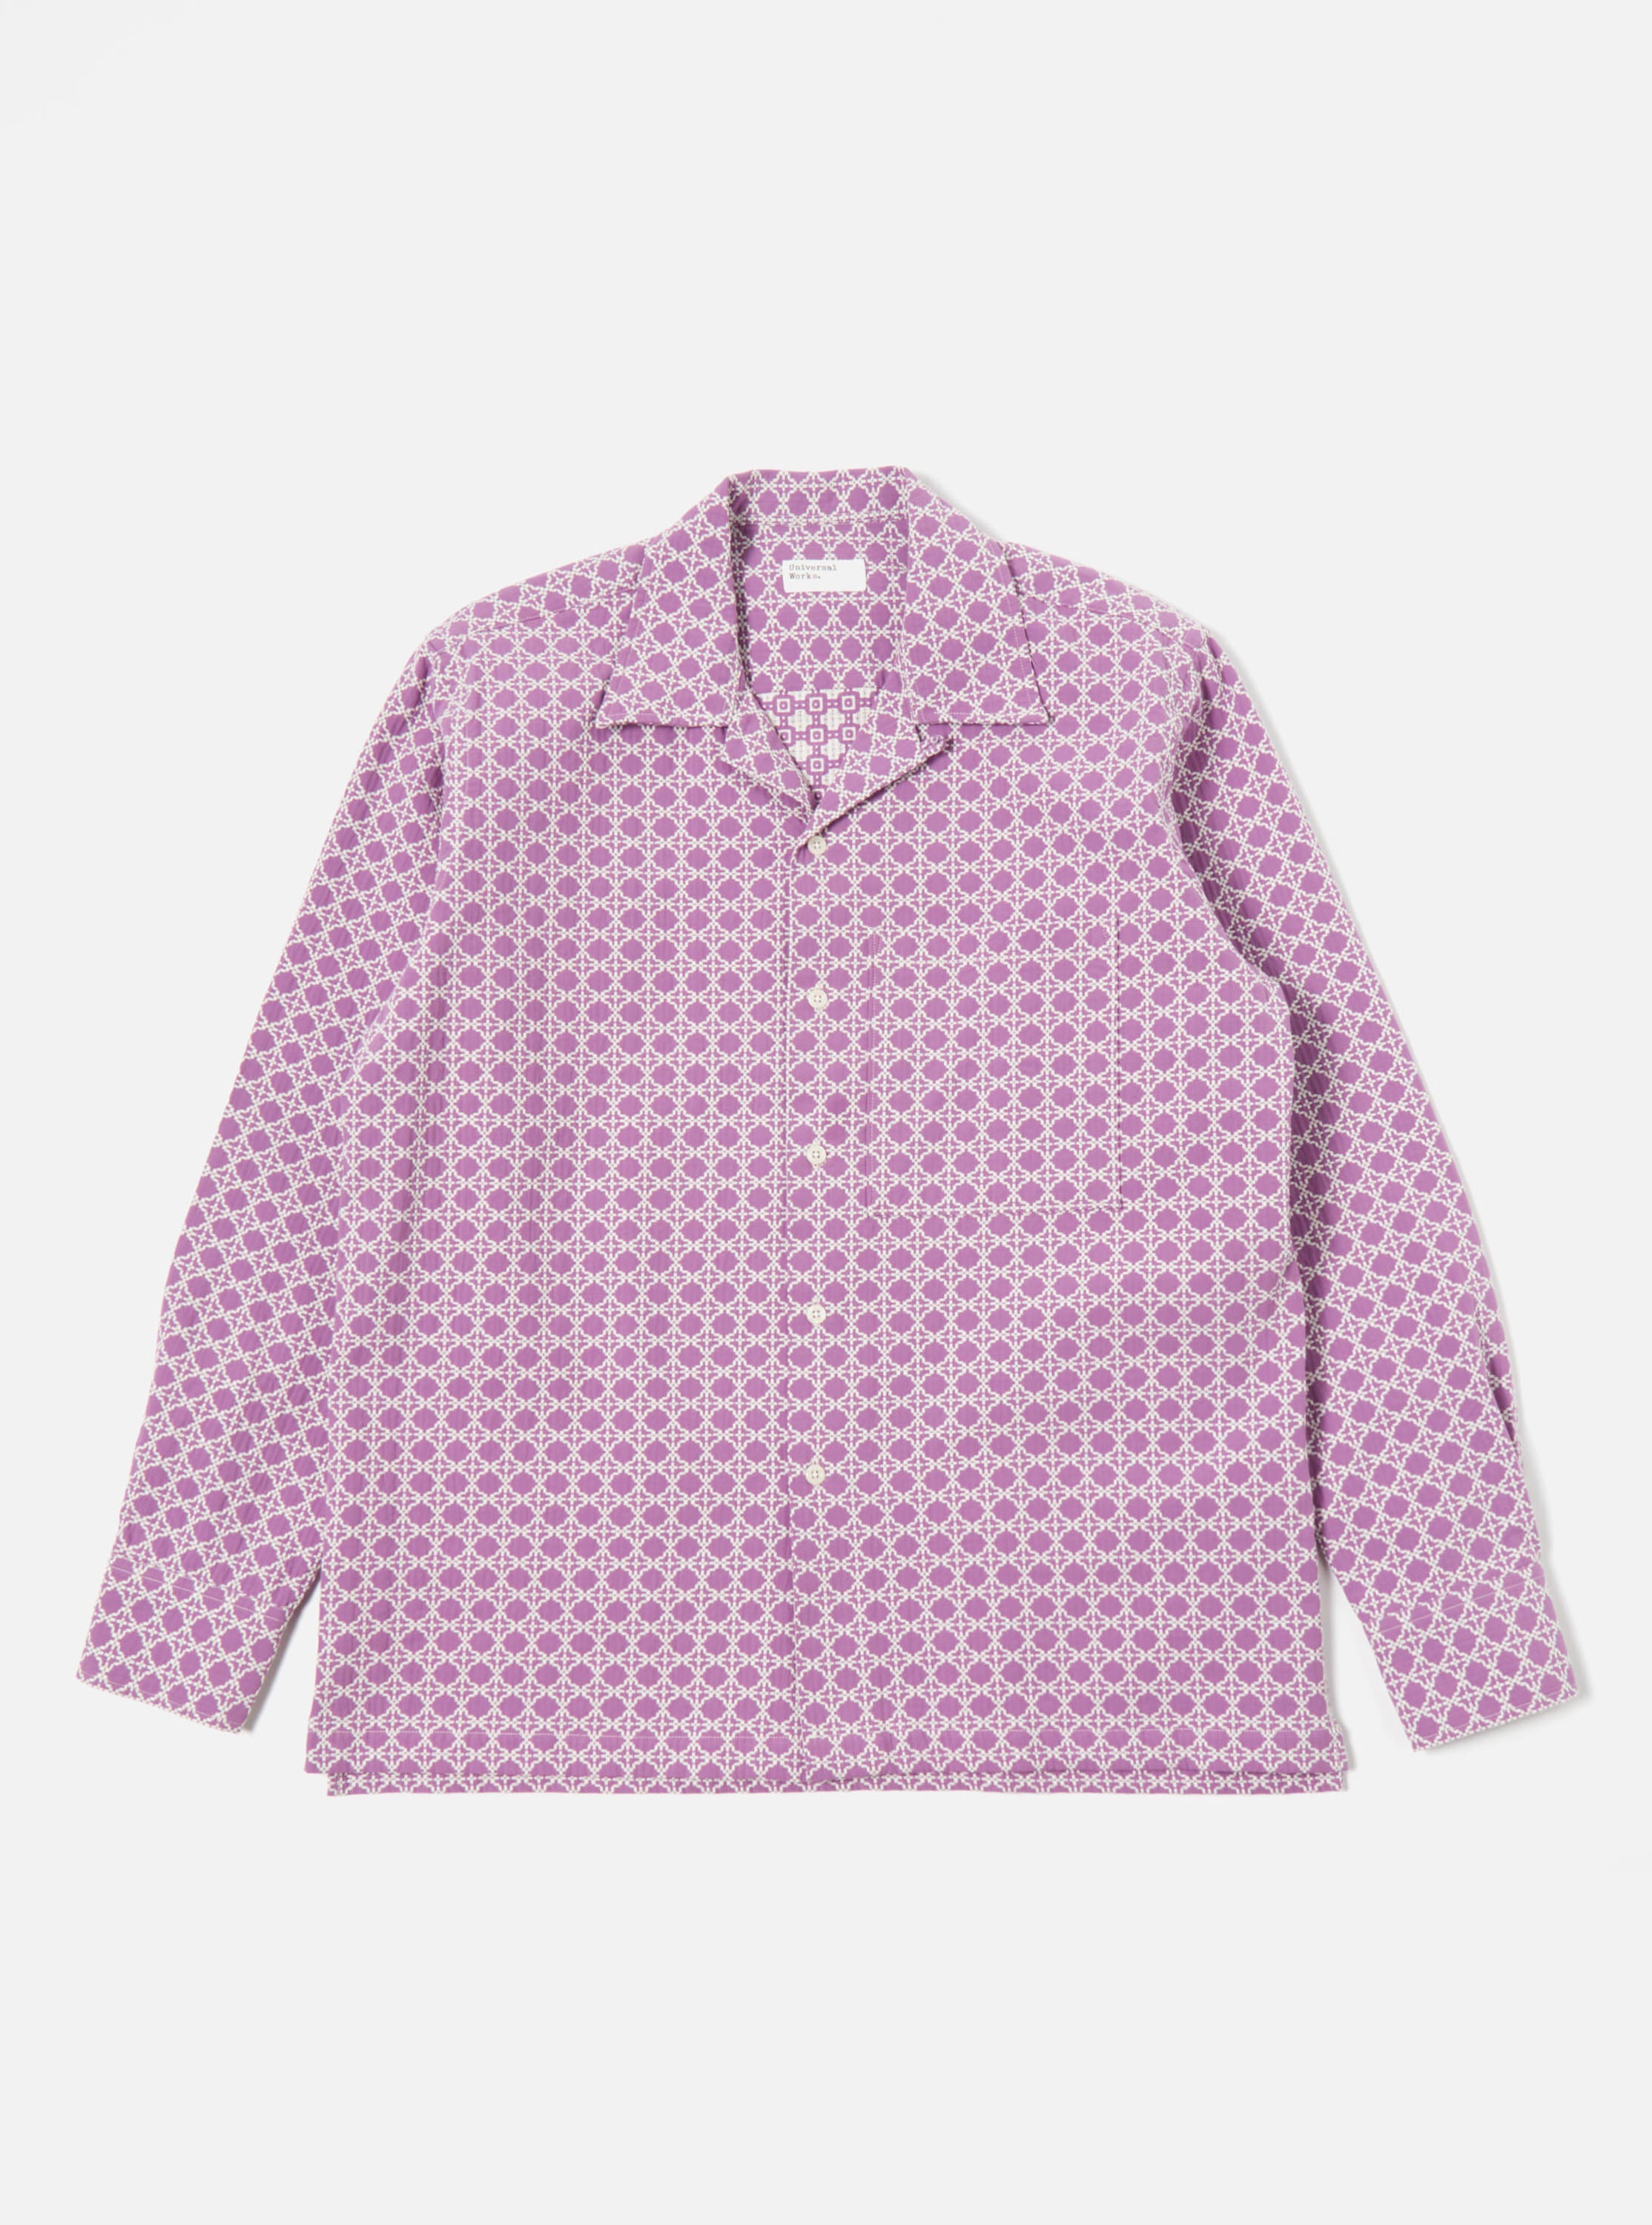 Universal Works L/S Camp Shirt II in Lilac Tile 2 Cotton